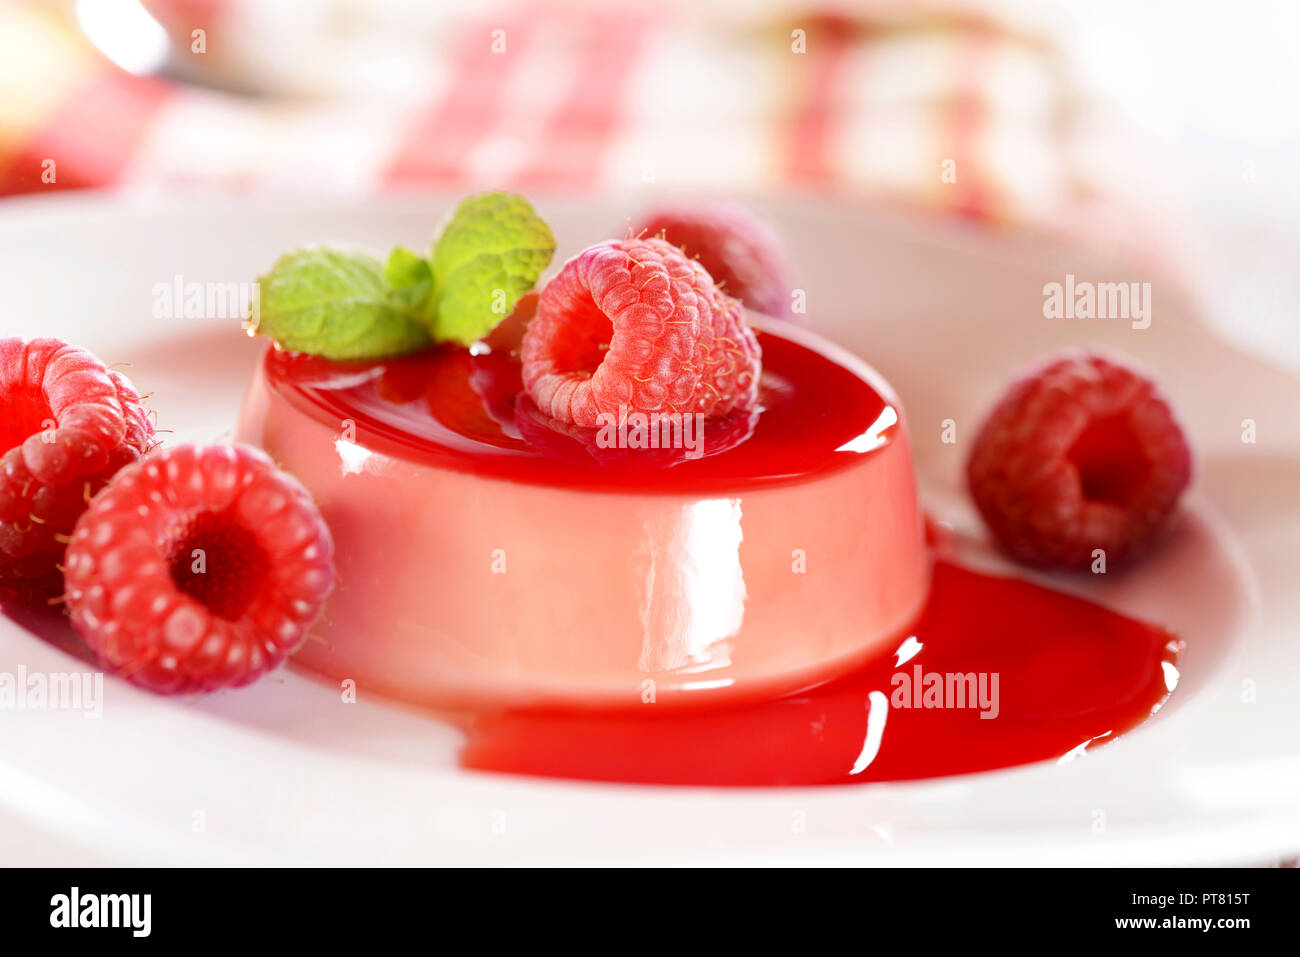 Panna cotta dessert with frsh raspberries and mint leaves on top Stock Photo